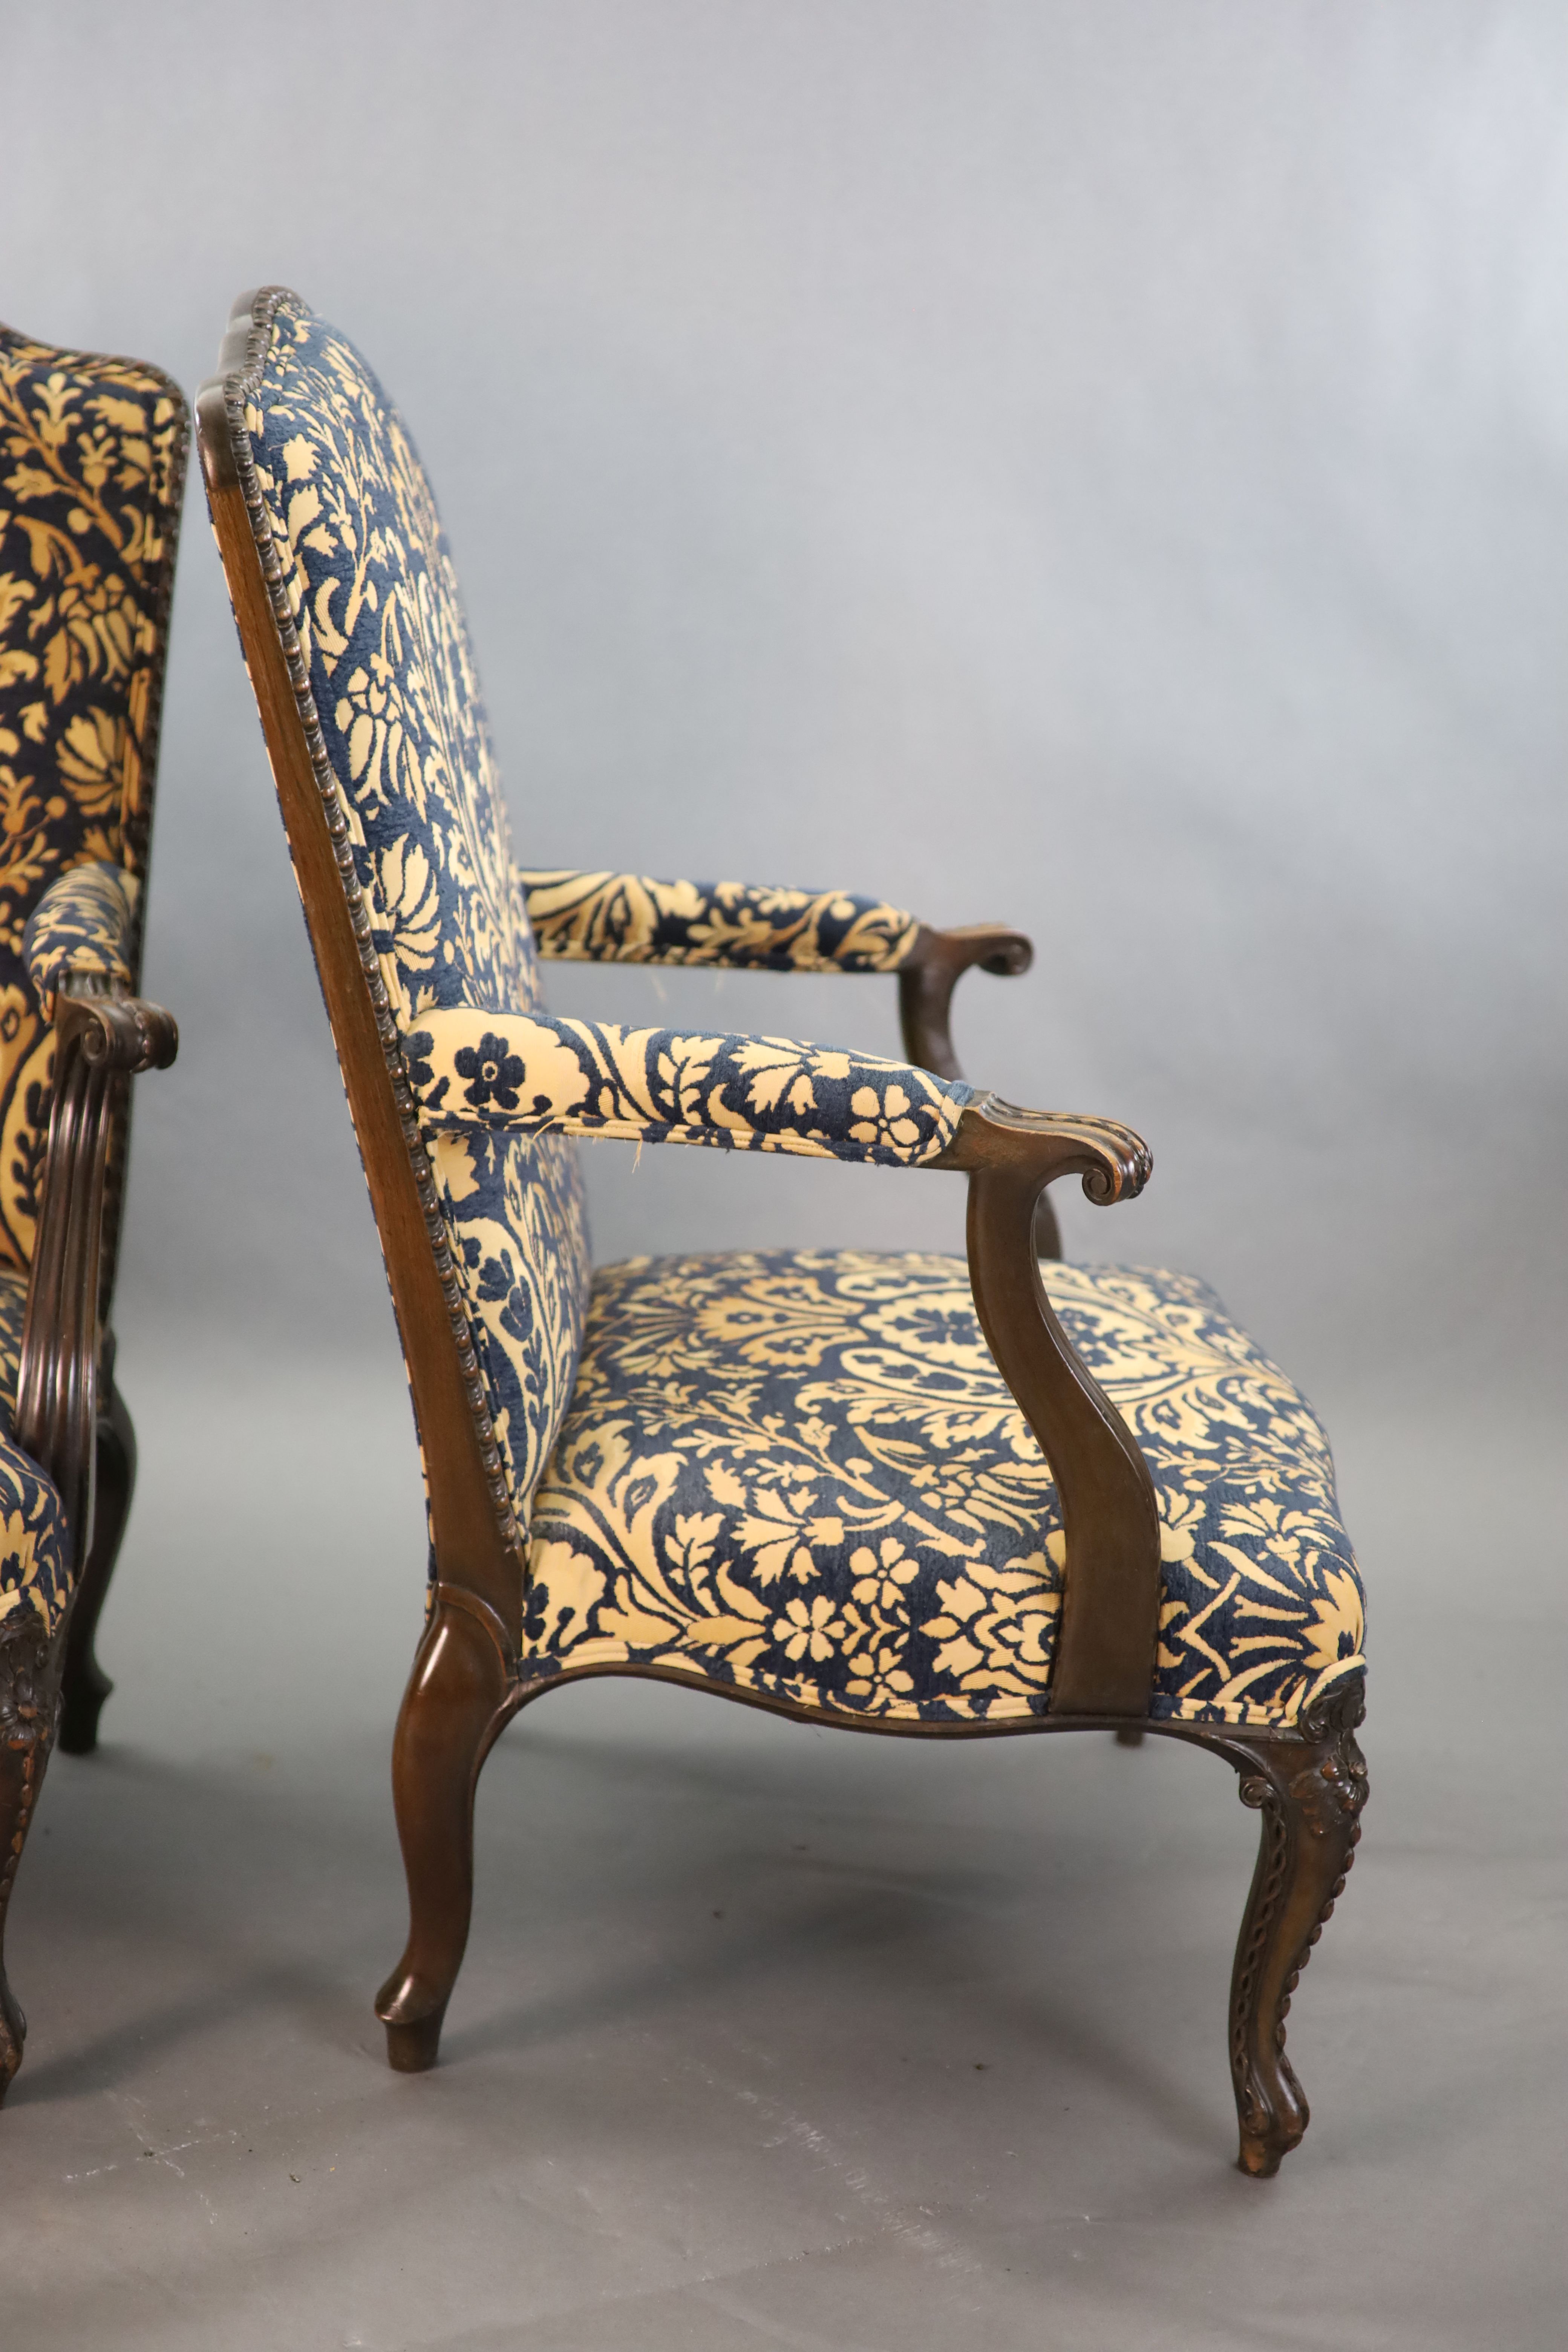 A pair of Louis XVI style mahogany fauteuils, W.2ft 6in. D.2ft 5in. H.3ft 6in.